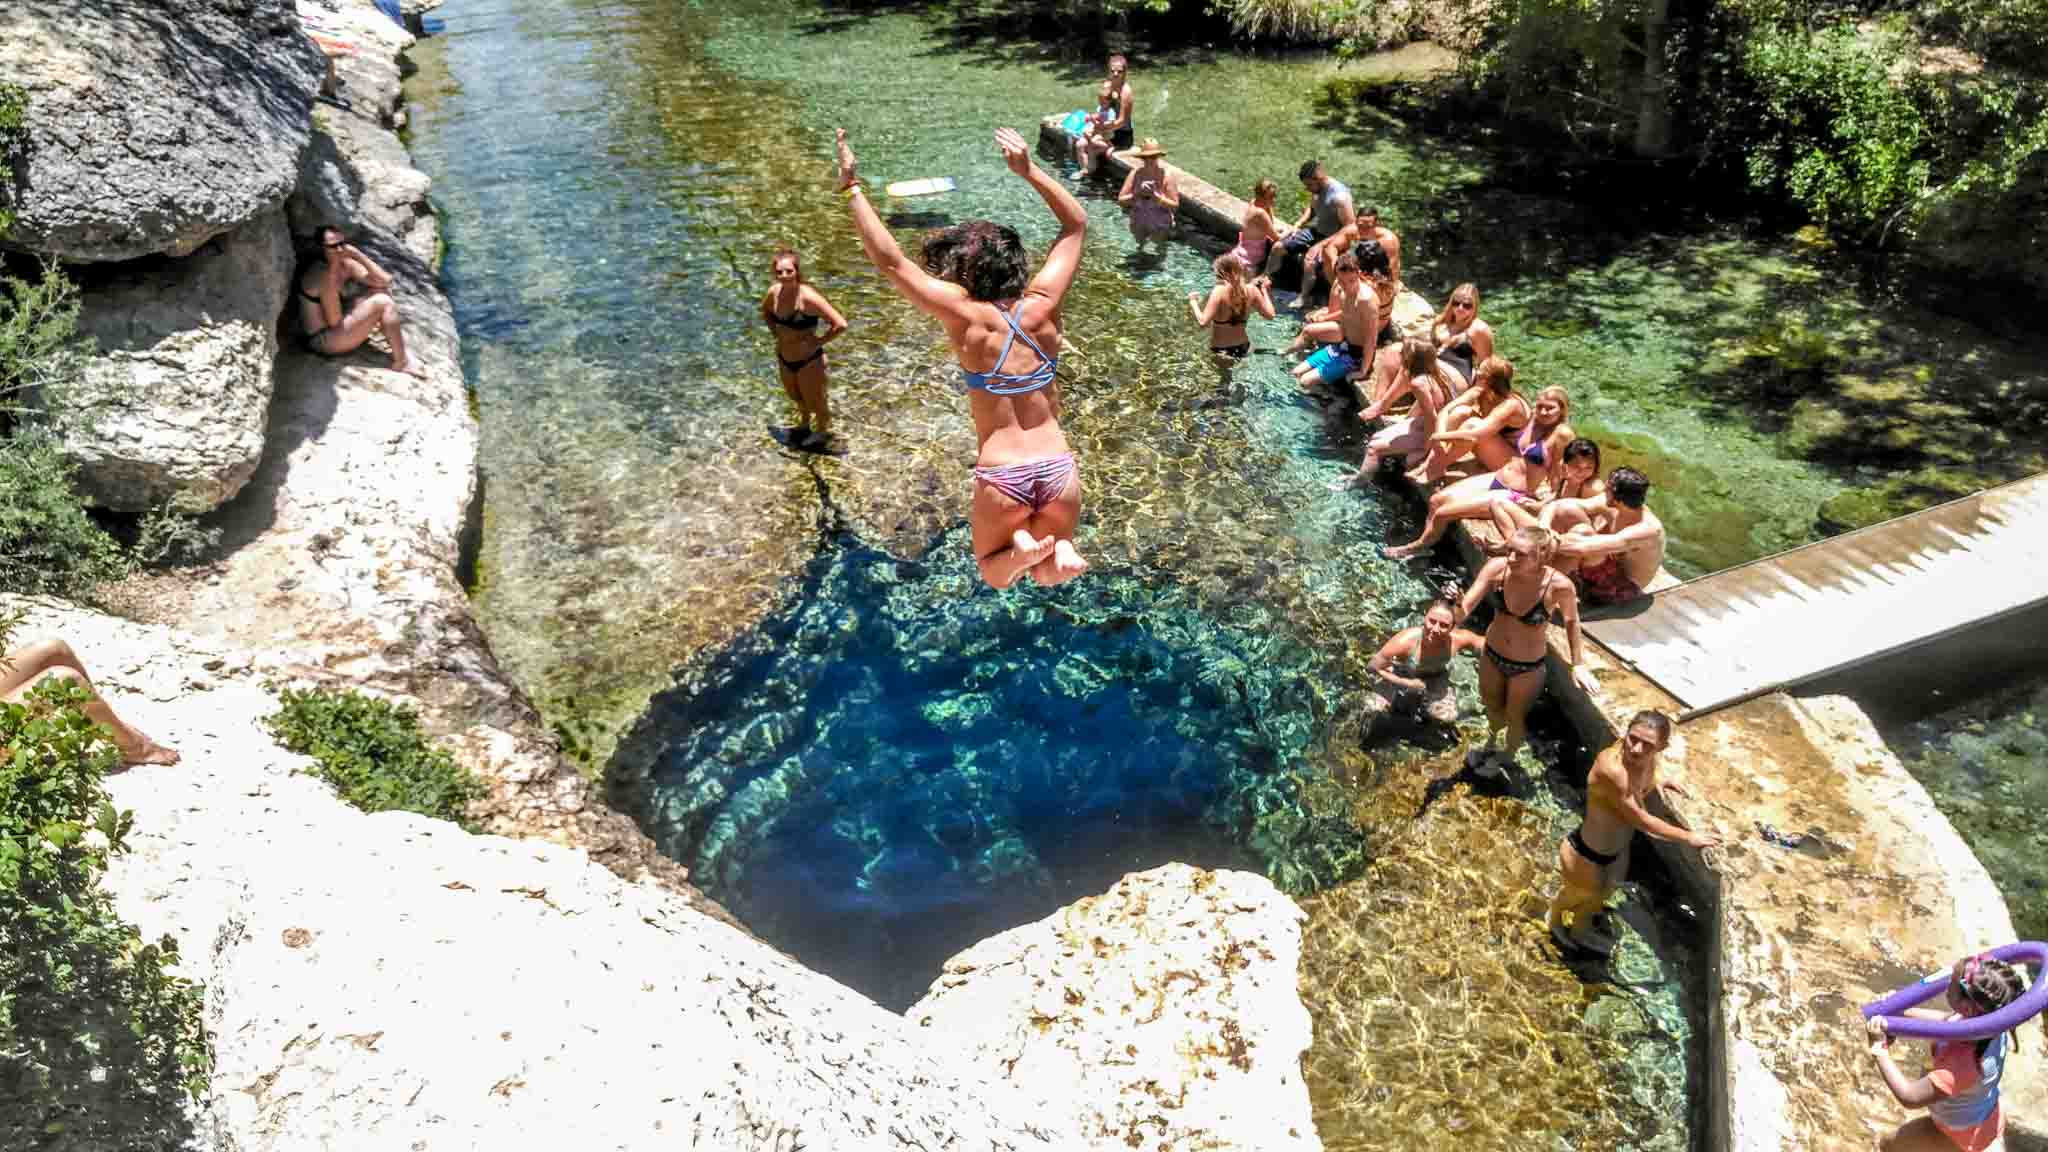 Woman jumping into a swimming hole as people look on.